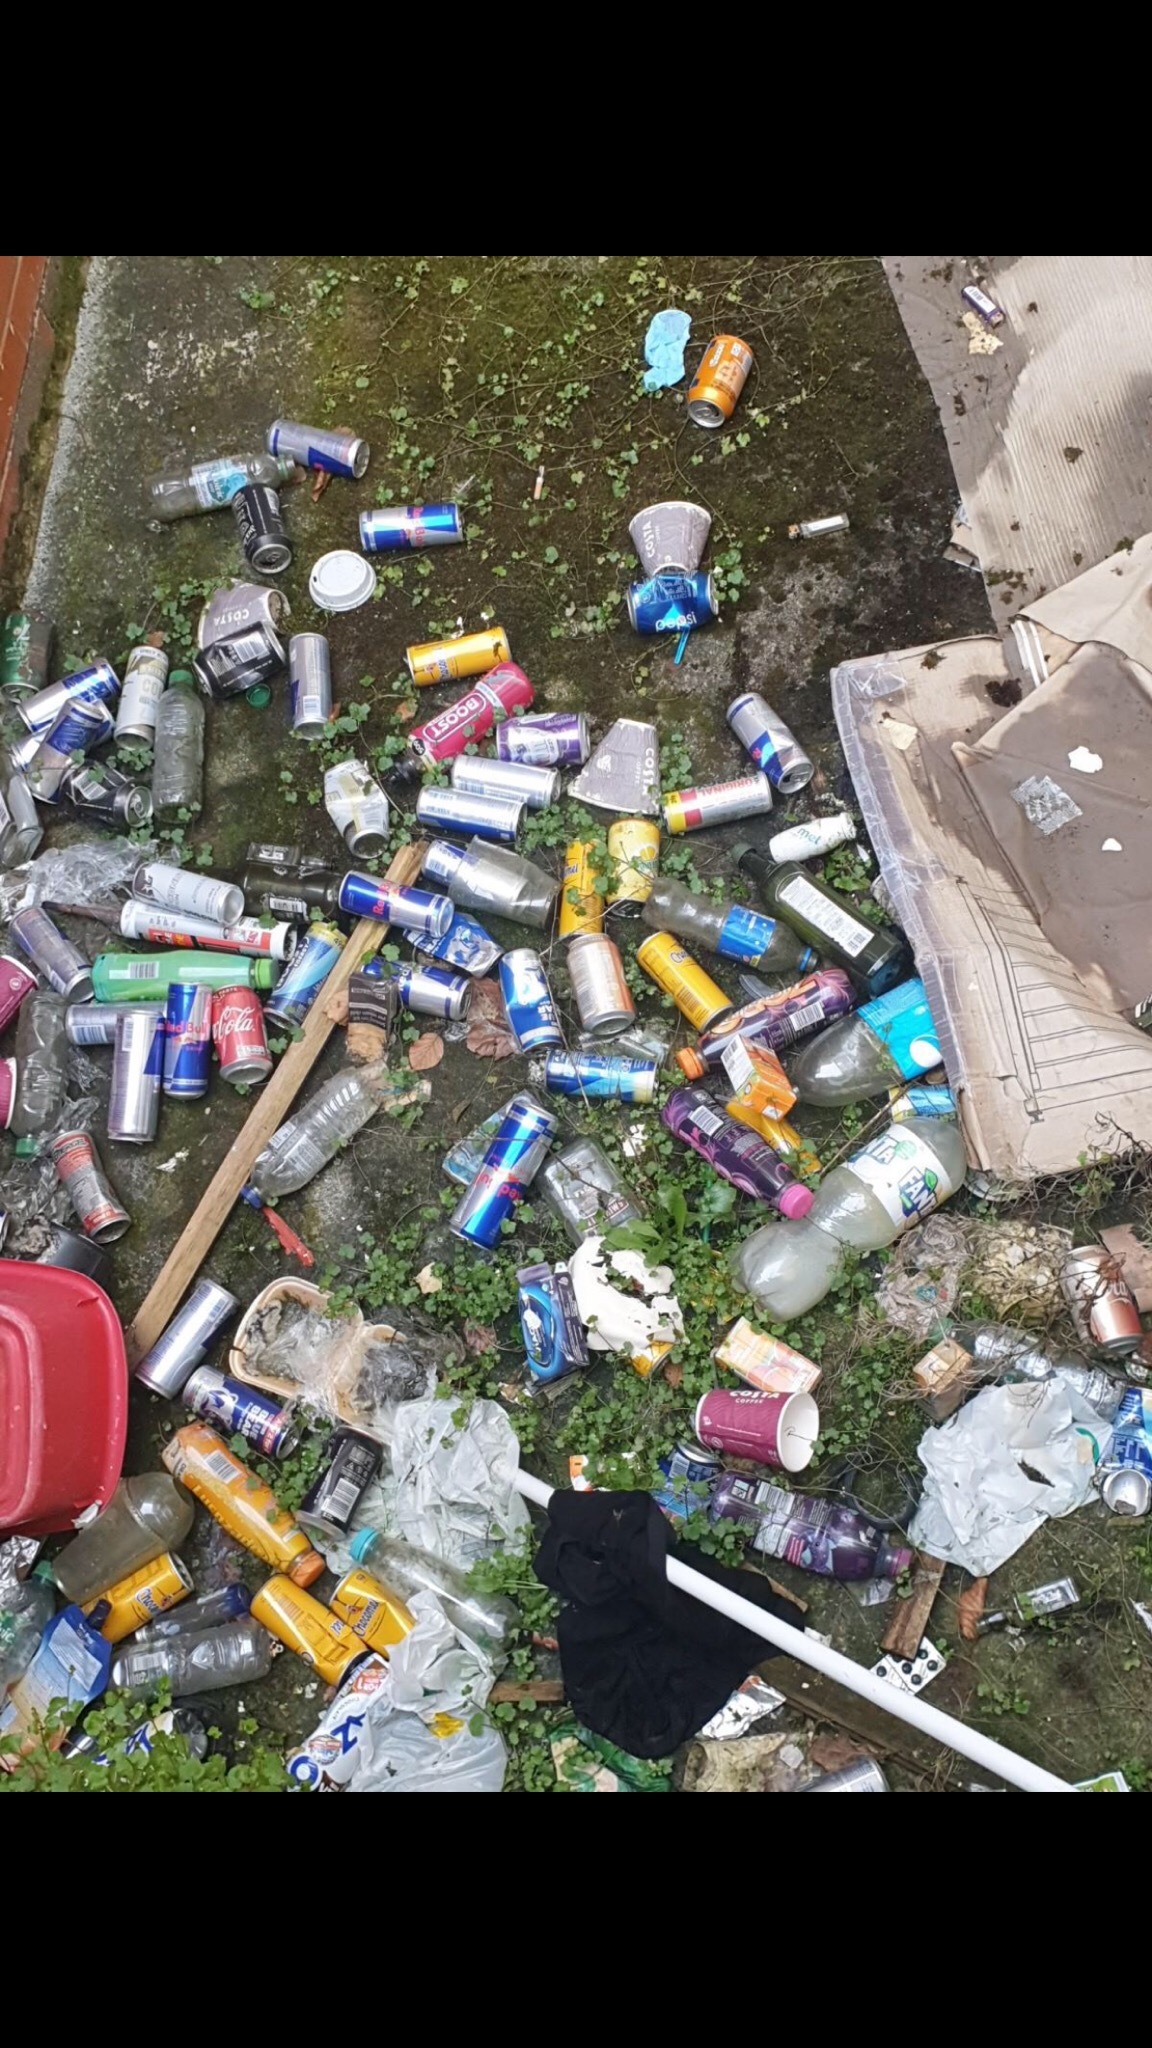 Teens have been causing havoc, taking drugs and littering close to thw Mosque on Bond Street in Nelson